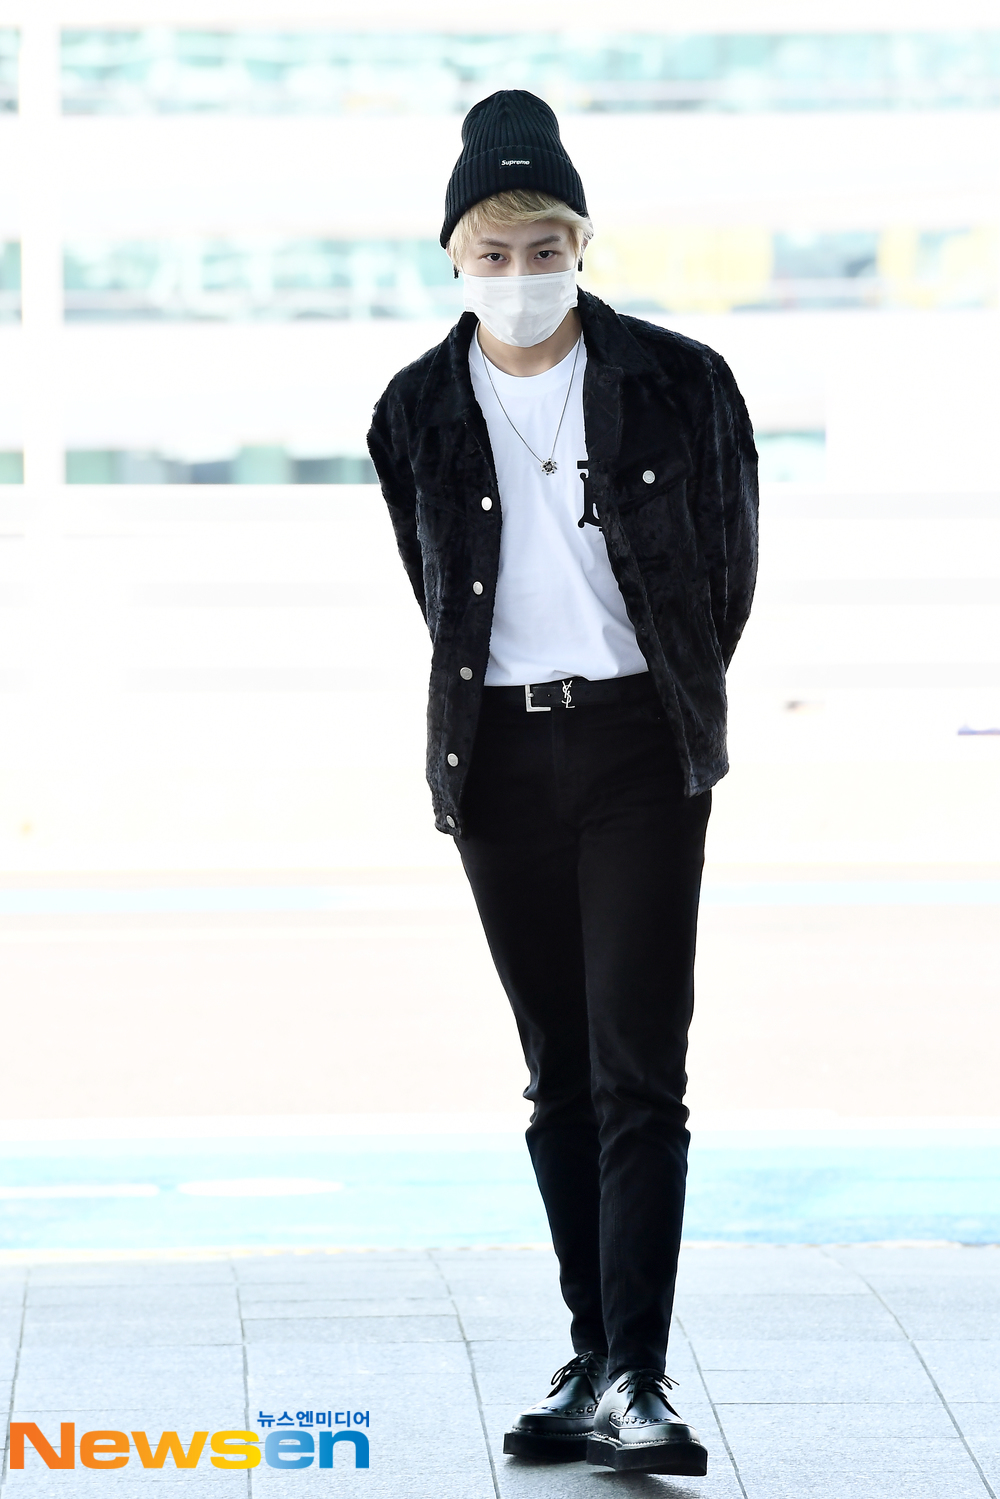 <p>Wanna One(WANNAONE) Ha Sung-woon, this 3-October 22 afternoon, Incheon, Jung-operation in Incheon International Airport via 1st fan meeting my moment in Taipei schedule to attend Tea Taiwan Chinese Taipei to departure.</p><p>Wanna One(WANNAONE) Ha Sung-woon, this Airport fashion, and Taiwan Chinese Taipei to departure.</p>